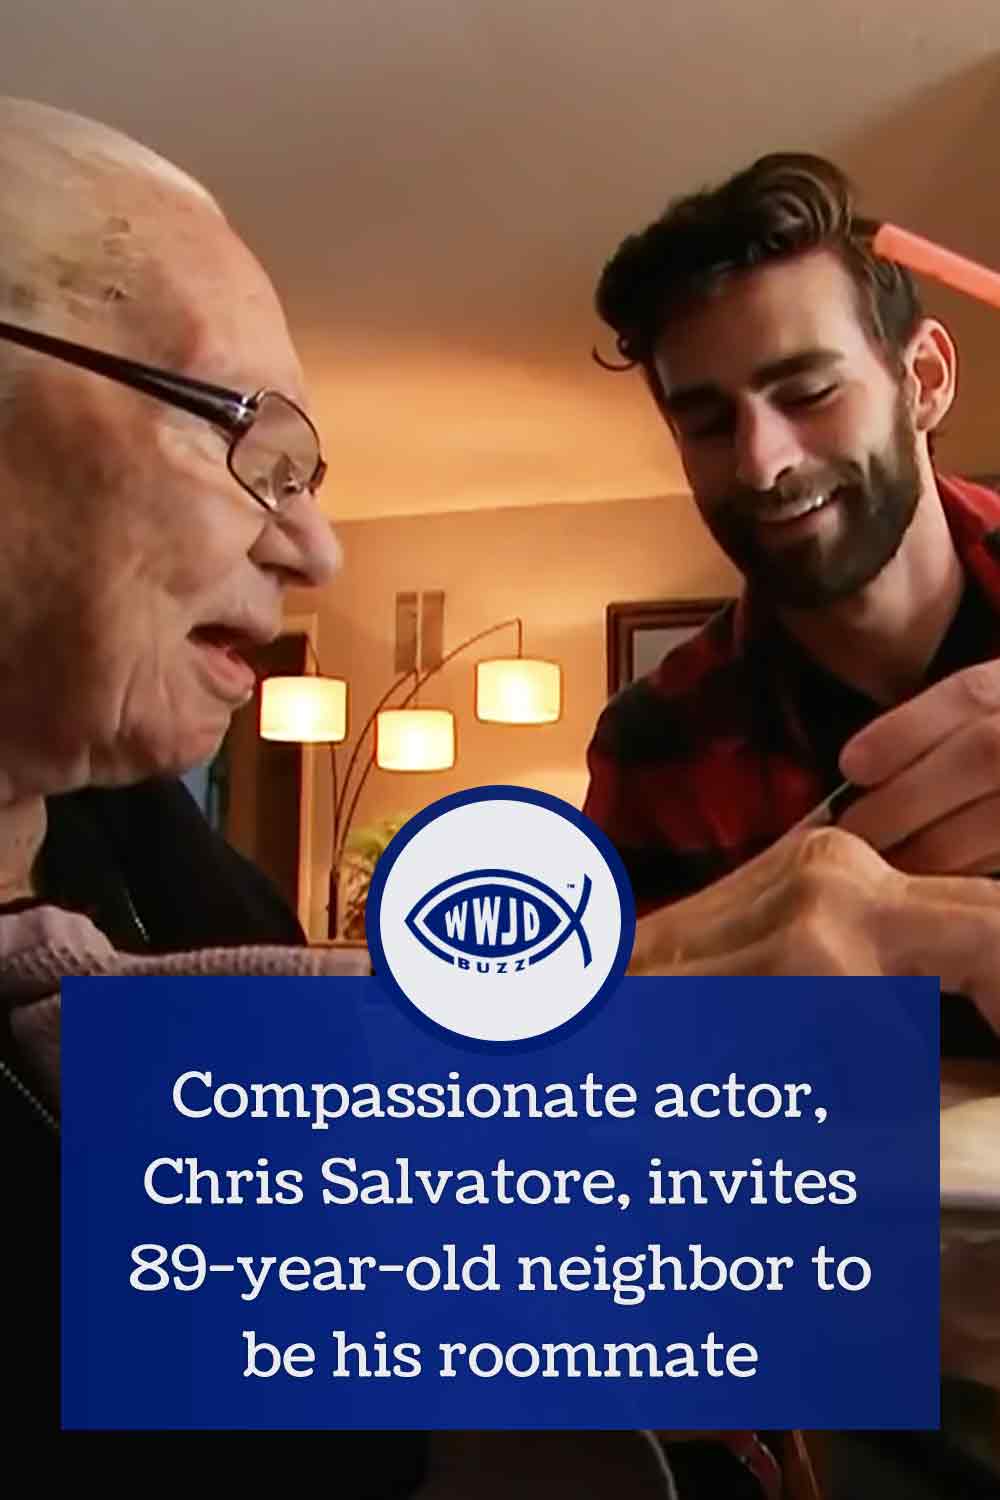 Compassionate actor, Chris Salvatore, invites 89-year-old neighbor to be his roommate